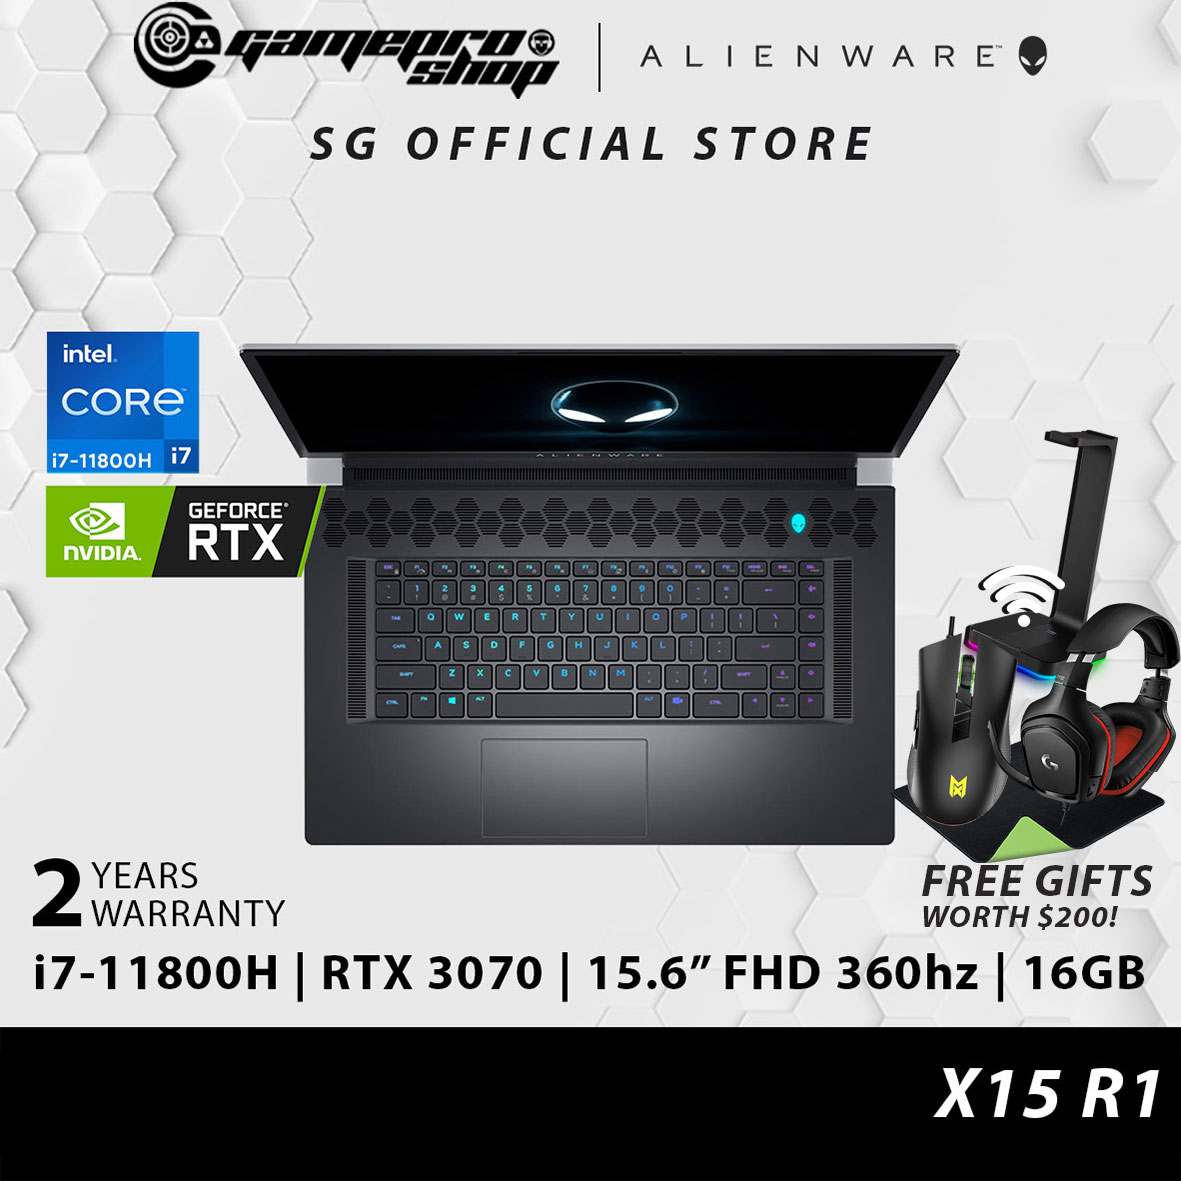 Build To Order/FREE GIFTS] Dell Alienware X15 R1 Gaming Laptop - i7-11800H  | RTX 3070  FHD 360hz | W10 | 2Y On-Site | Lazada Singapore